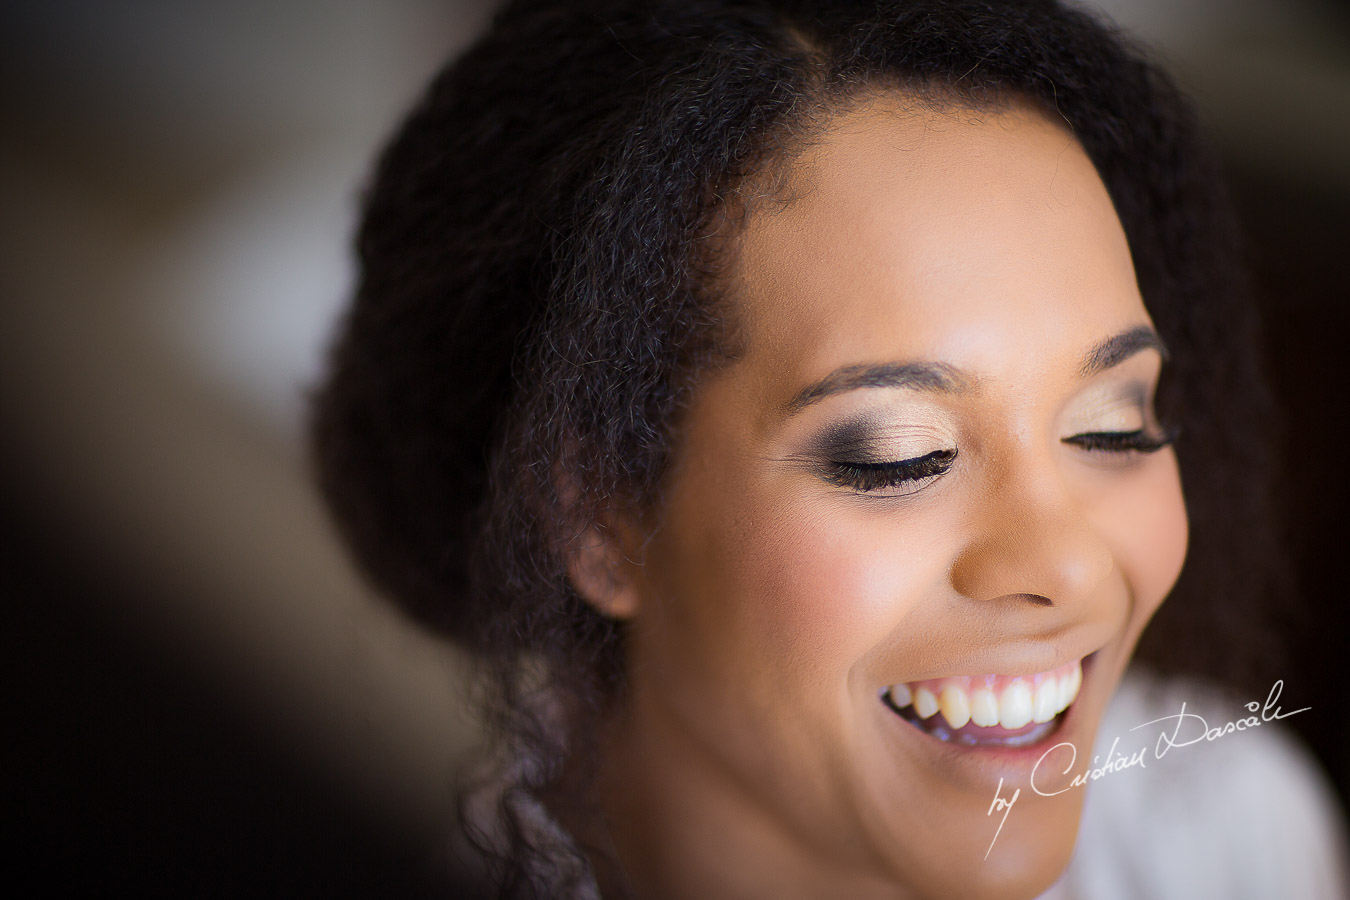 Beautiful smile of the bride Joanna captured at her wedding at Minthis Hills in Cyprus, by Cristian Dascalu.